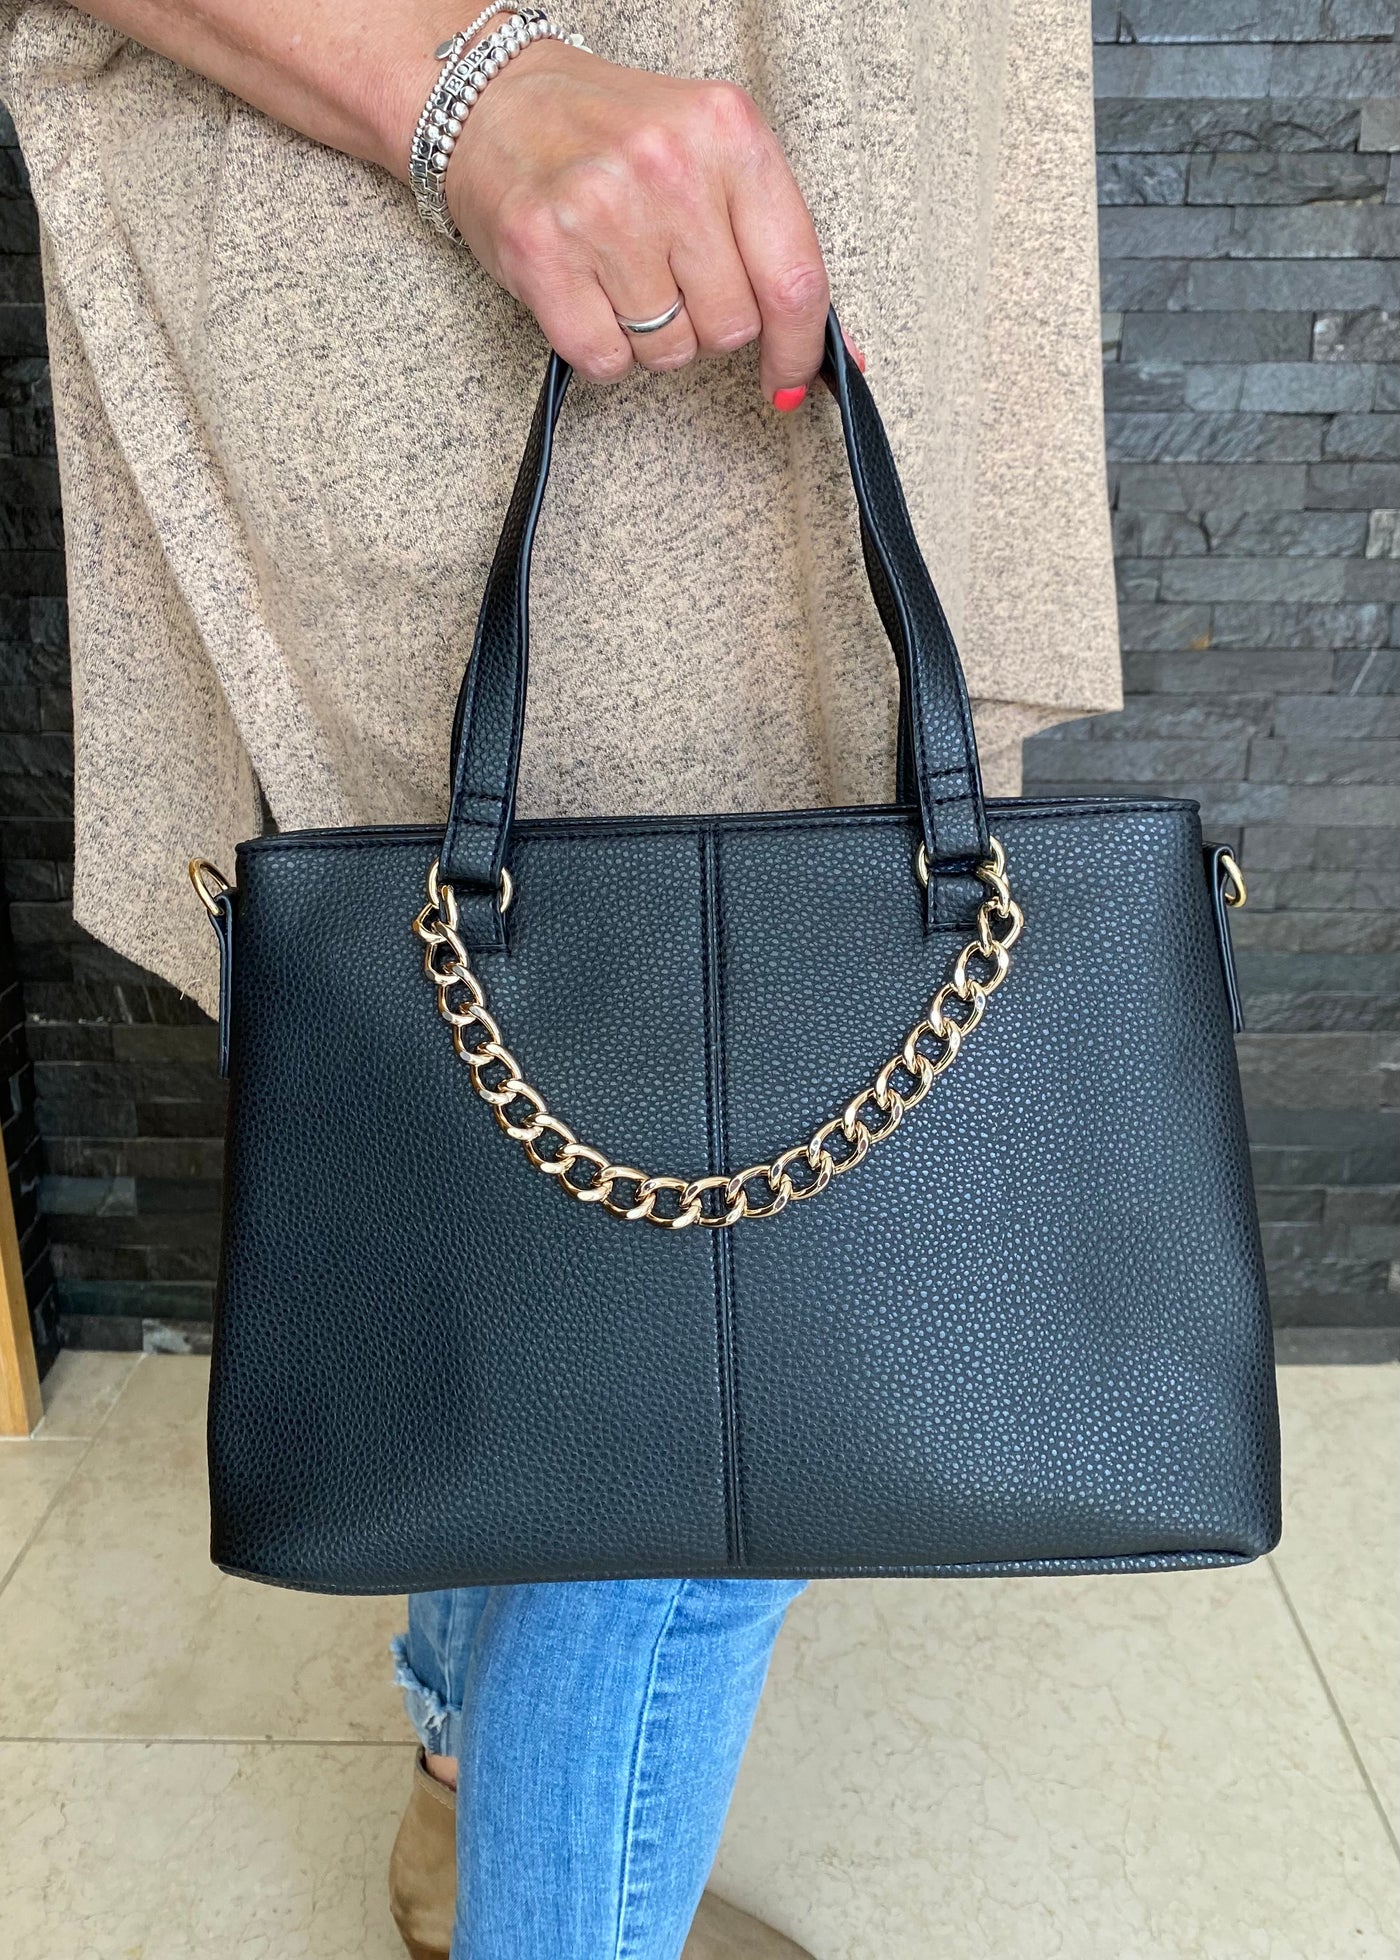 Black Faux Leather Bag with Gold Chain